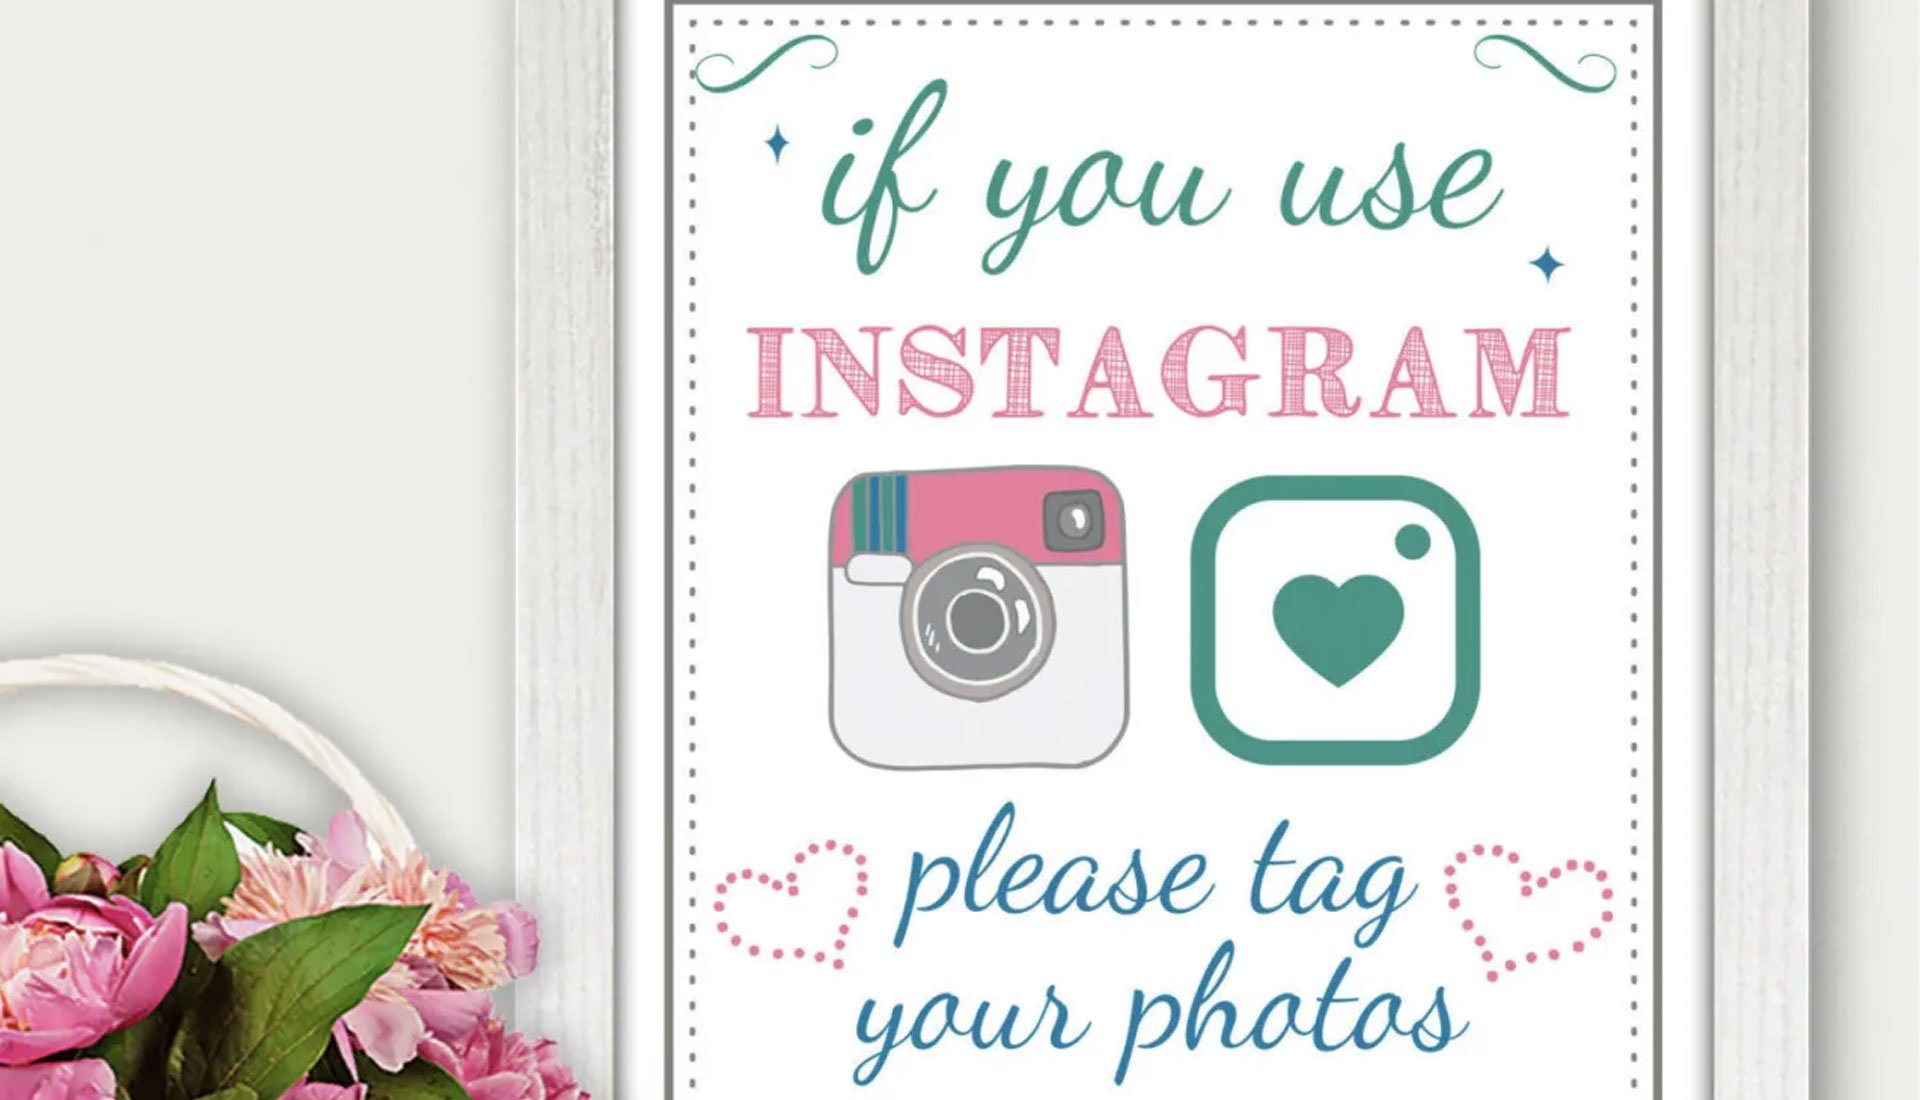 Making the most of Instagram and Snapchat on your wedding day